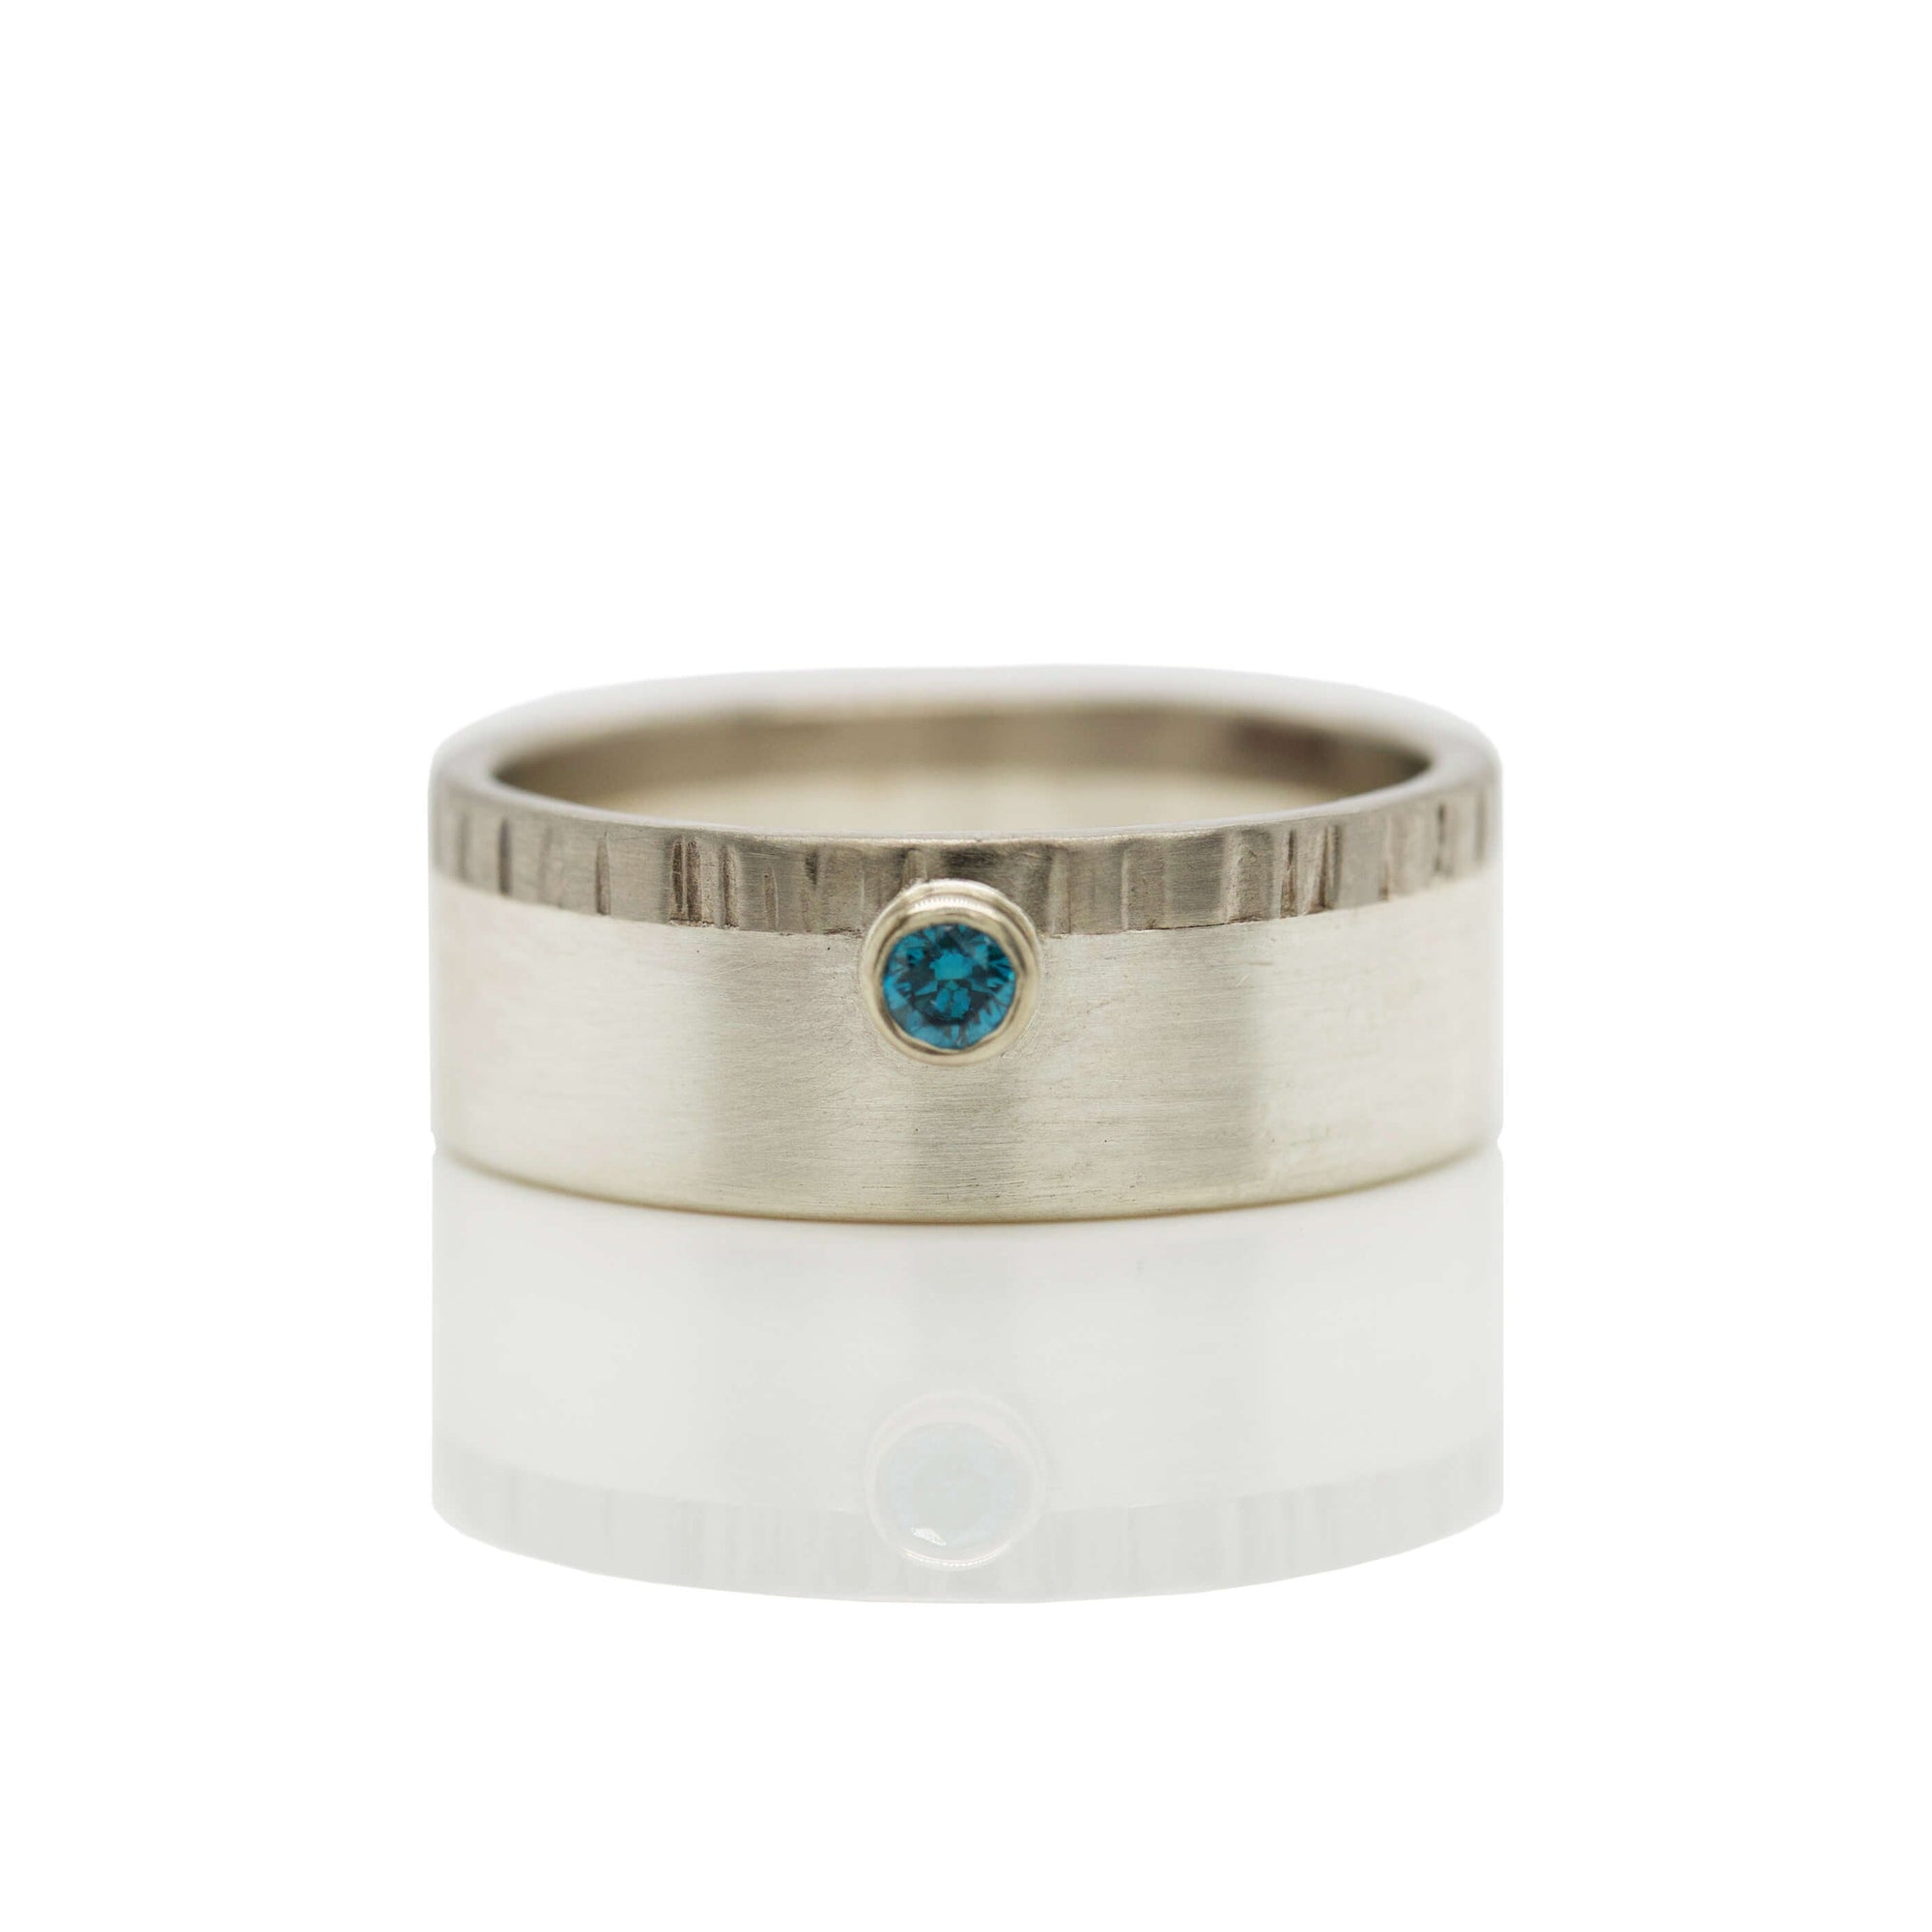 Sterling silver and palladium wedding band with blue diamond accent.